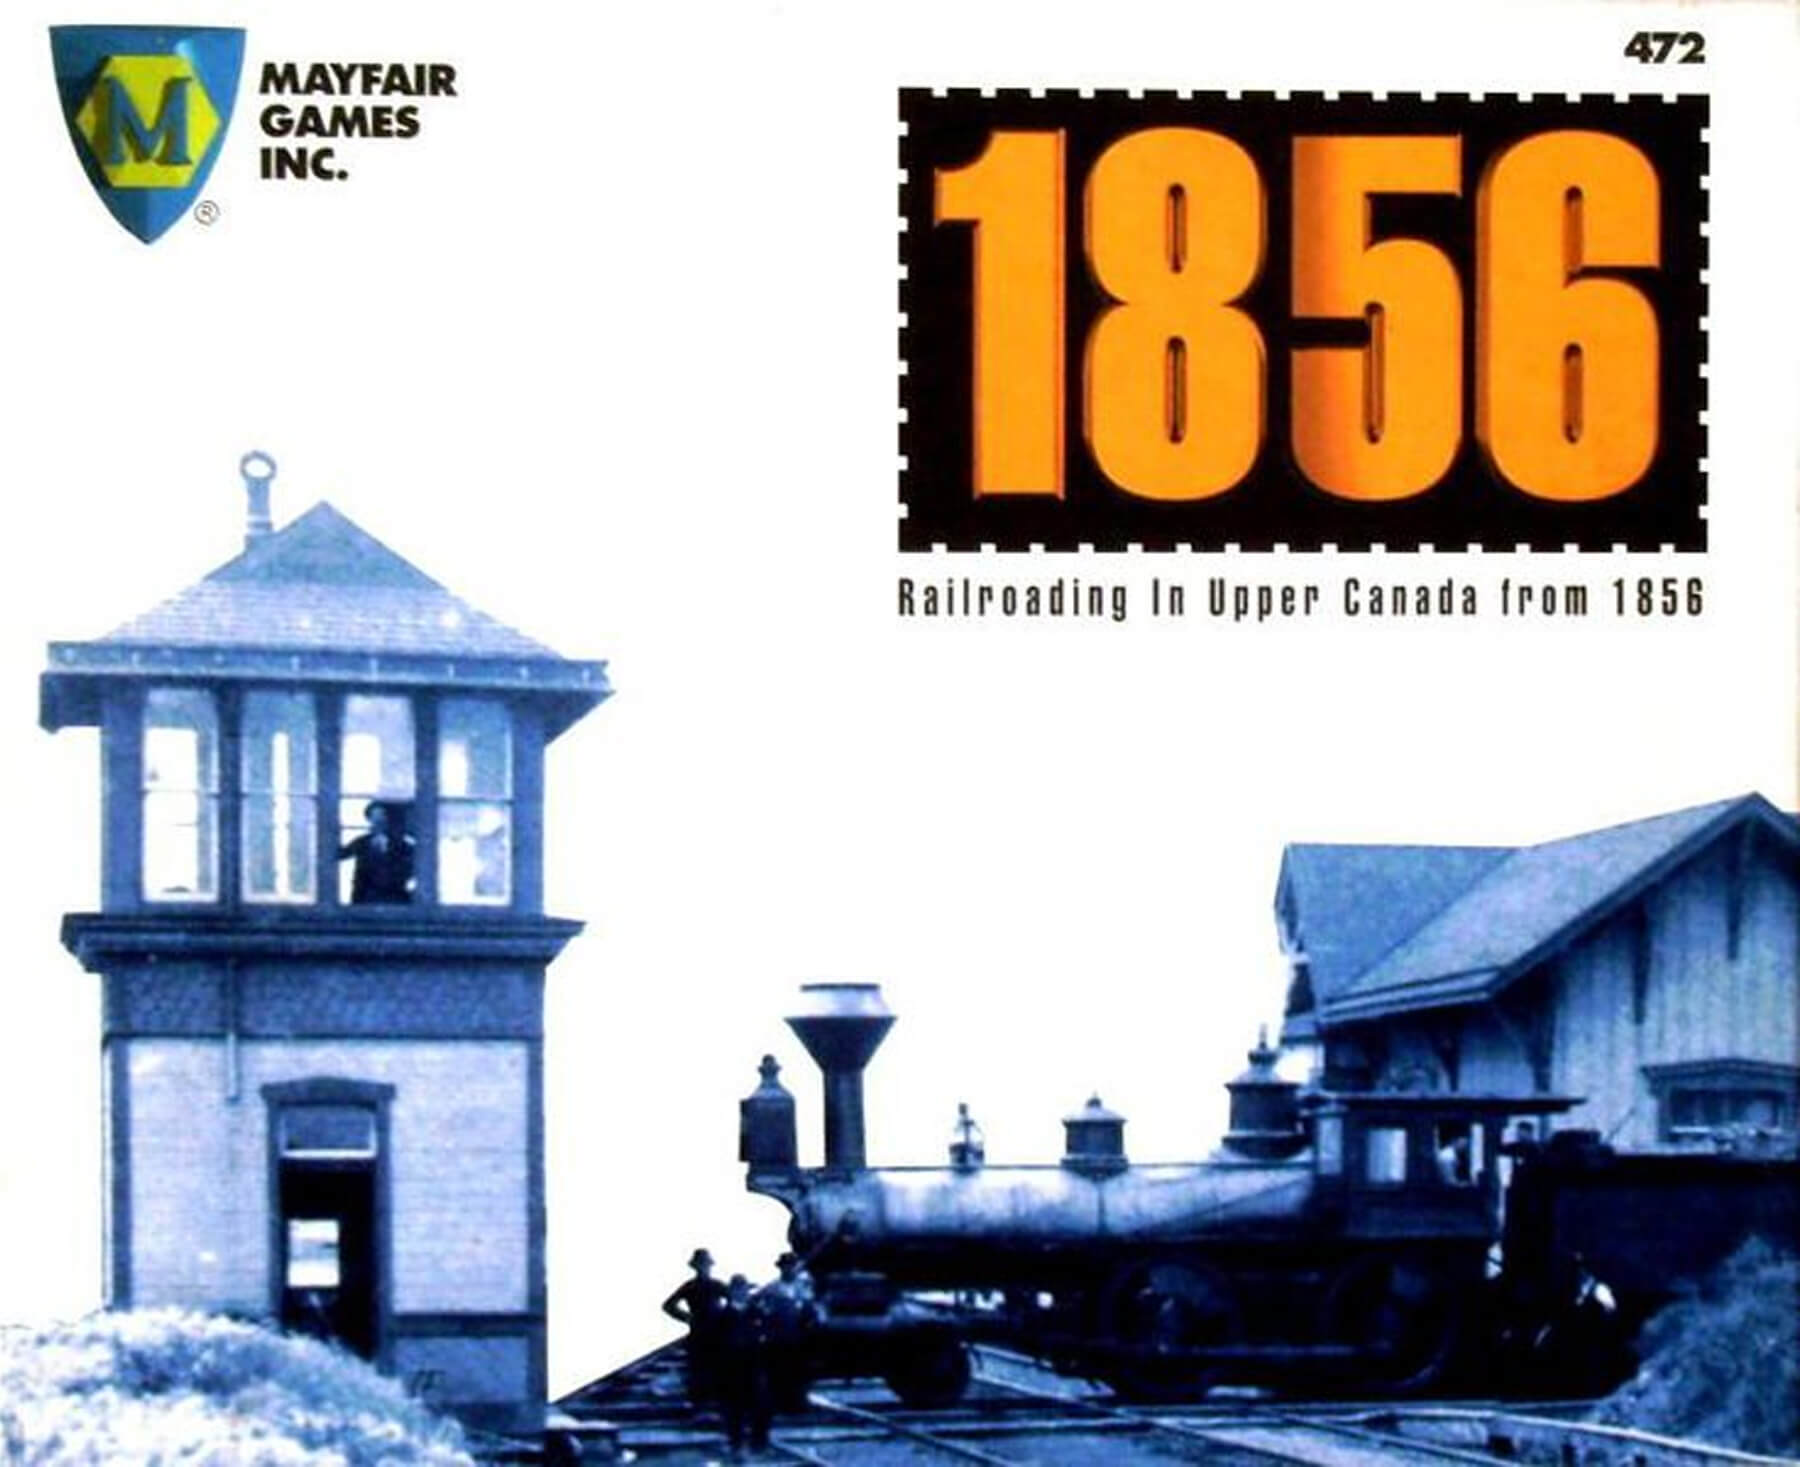 The cover art for the board game 1856.